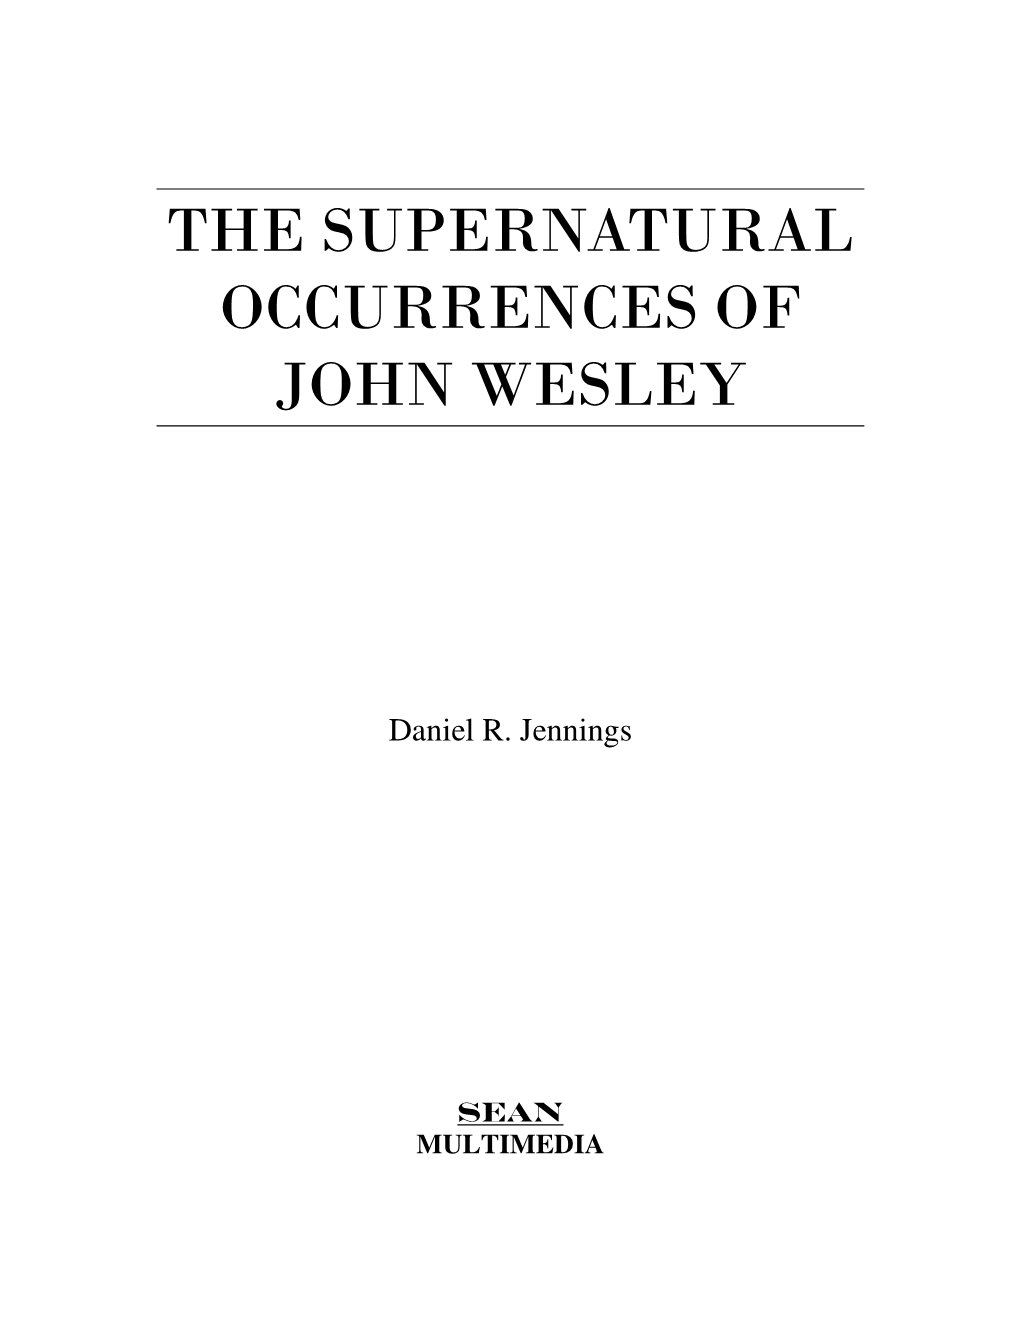 The Supernatural Occurrences of John Wesley